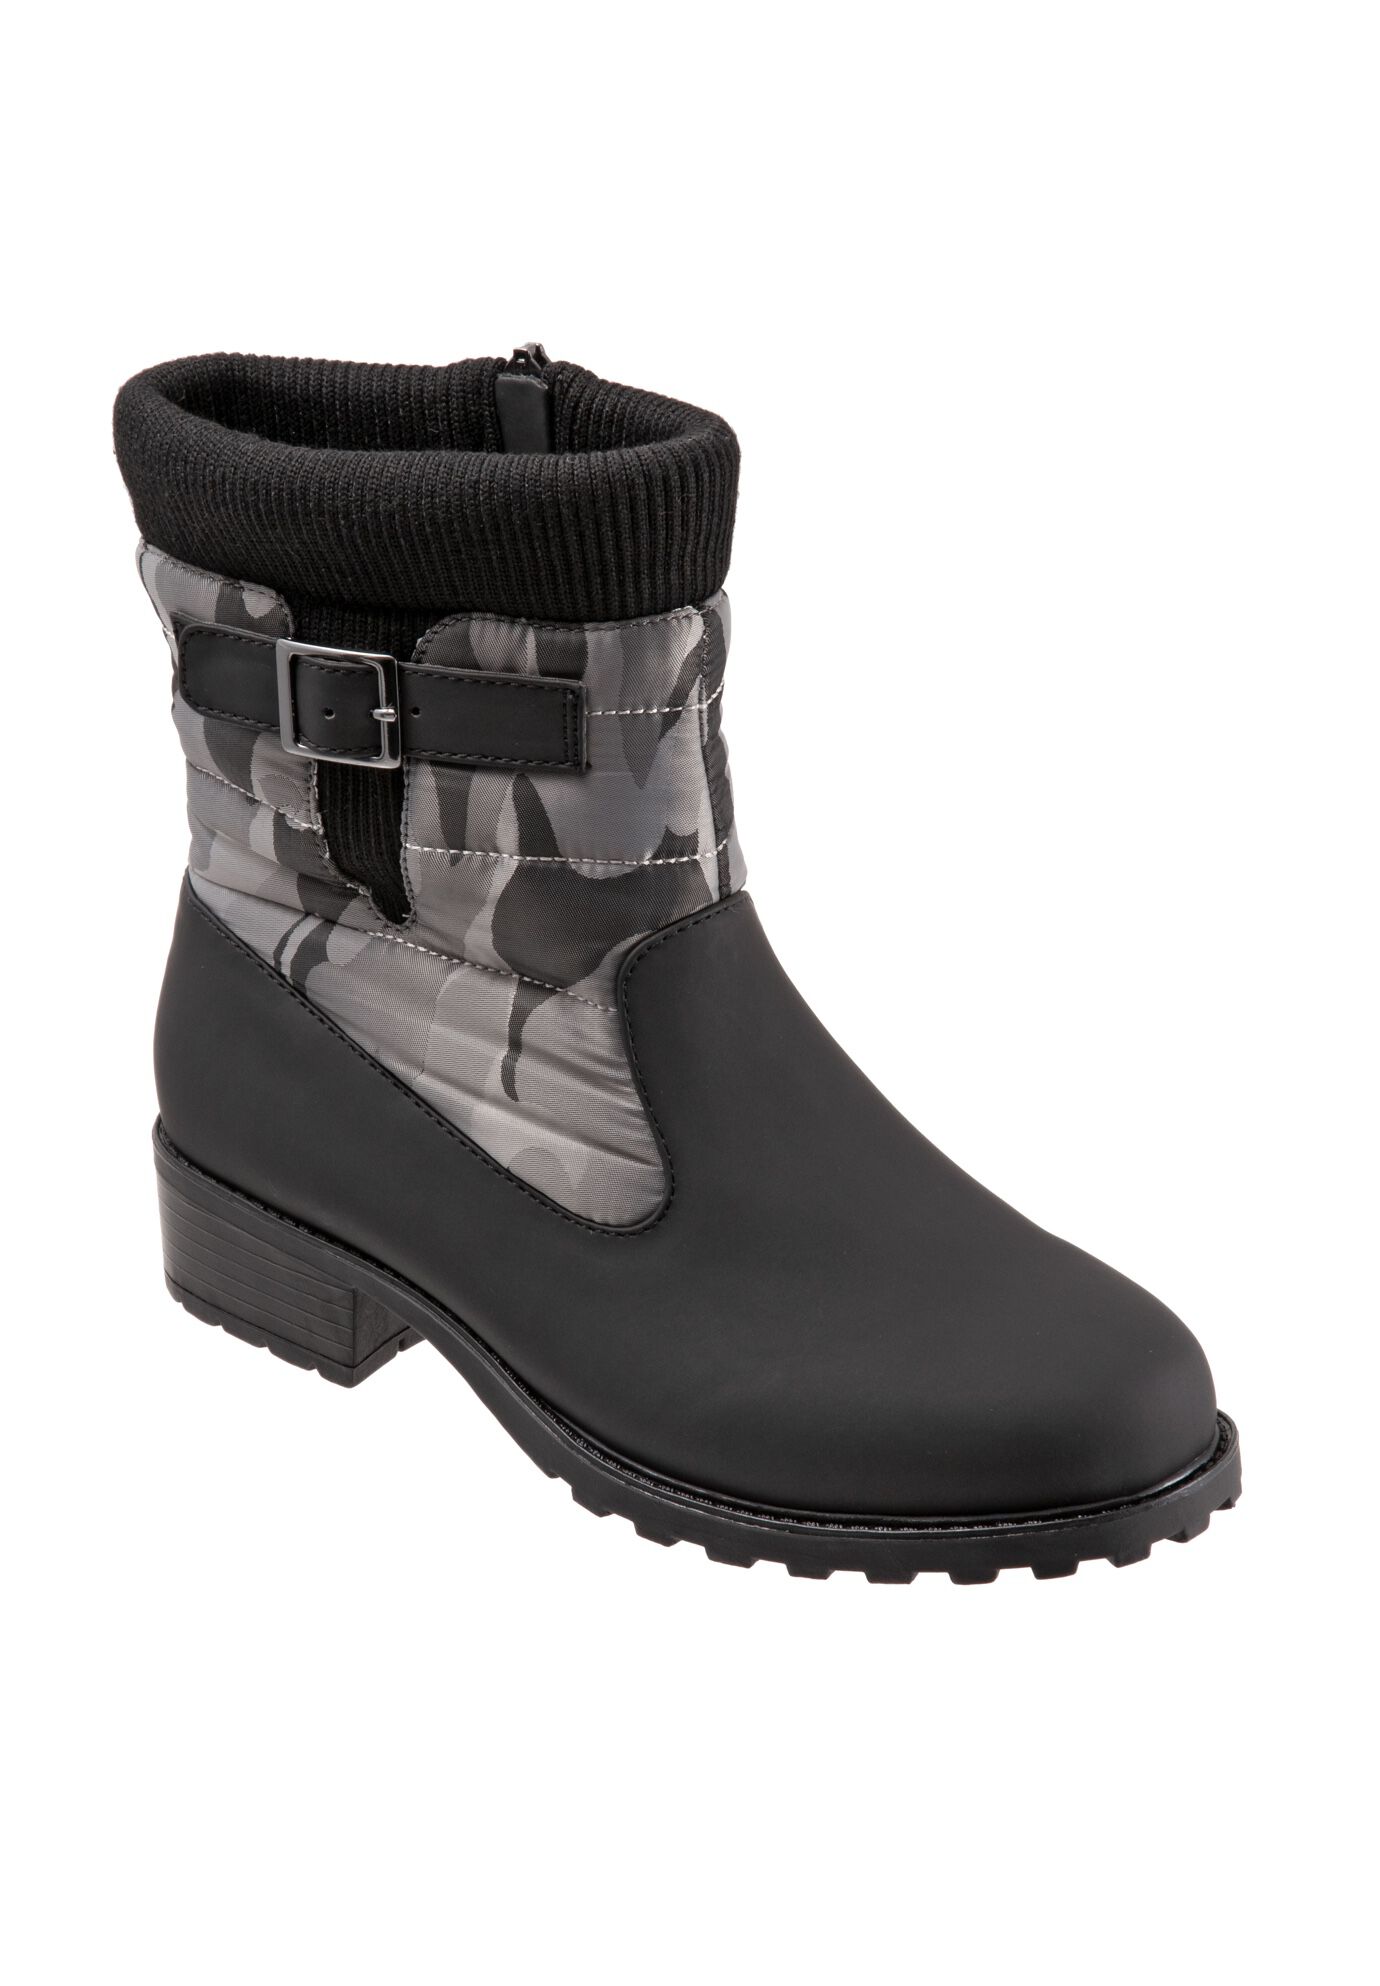 Extra Wide Width Women's Berry Mid Boot by Trotters in Black Dark Camo (Size 7 1/2 WW)